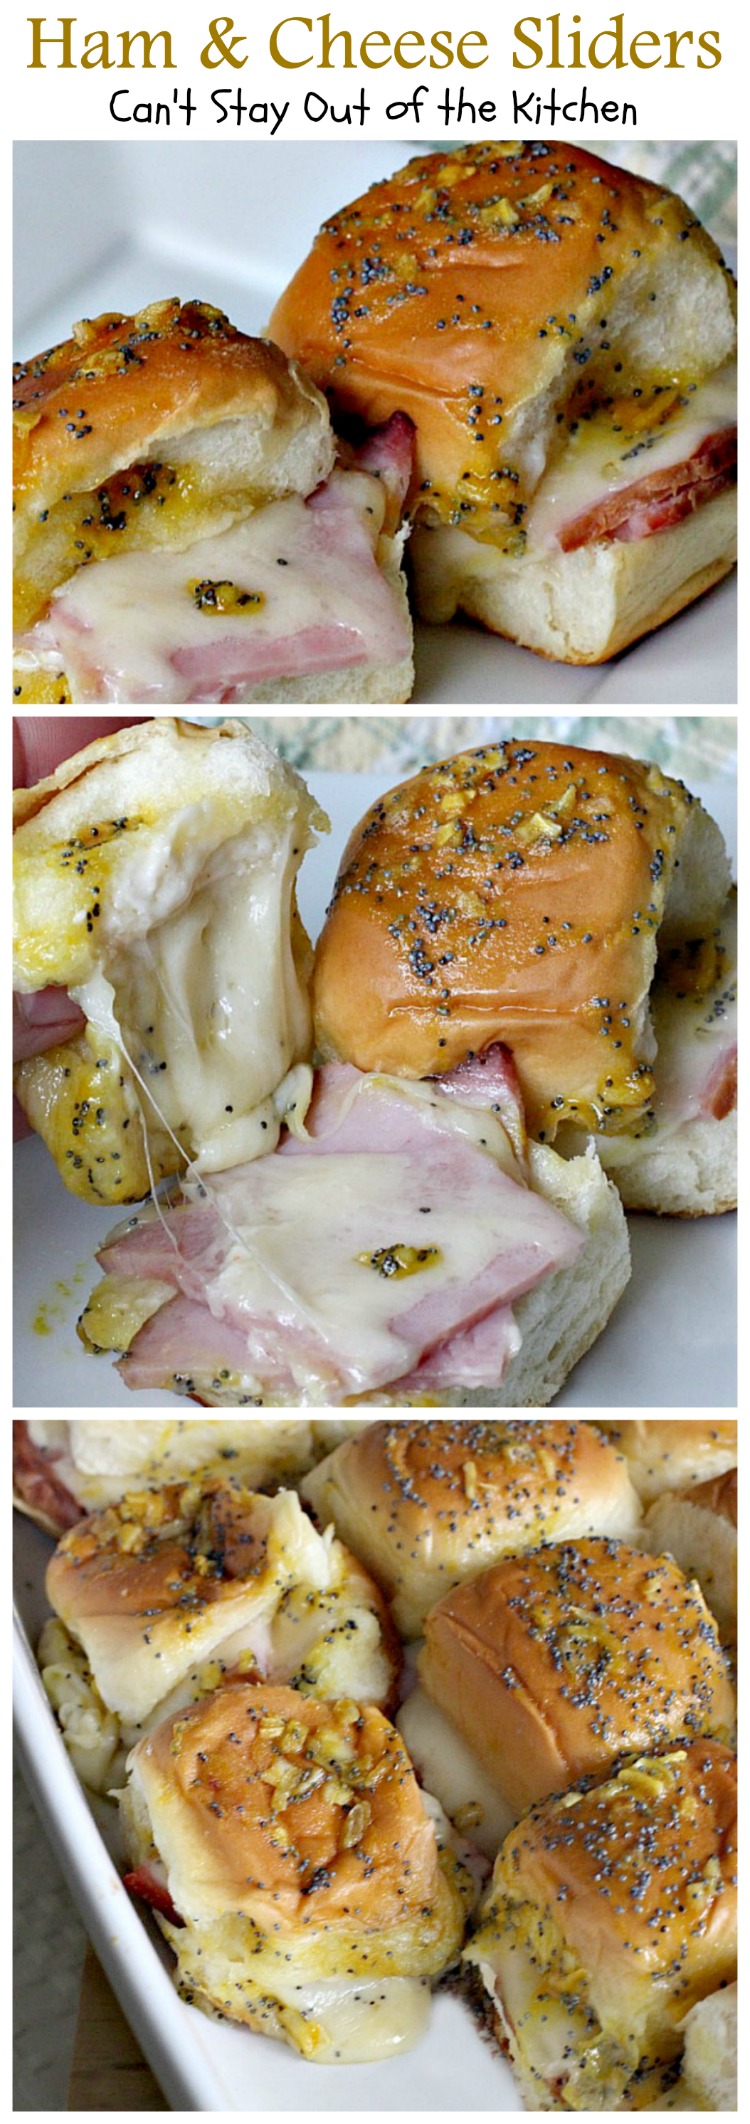 Ham & Cheese Sliders | Can't Stay Out of the Kitchen | these fantastic #sliders are so easy to make and so delicious to eat. They use #KingsHawaiianRolls. Great for #Tailgating and #SuperBowl parties. #Ham #Swisscheese